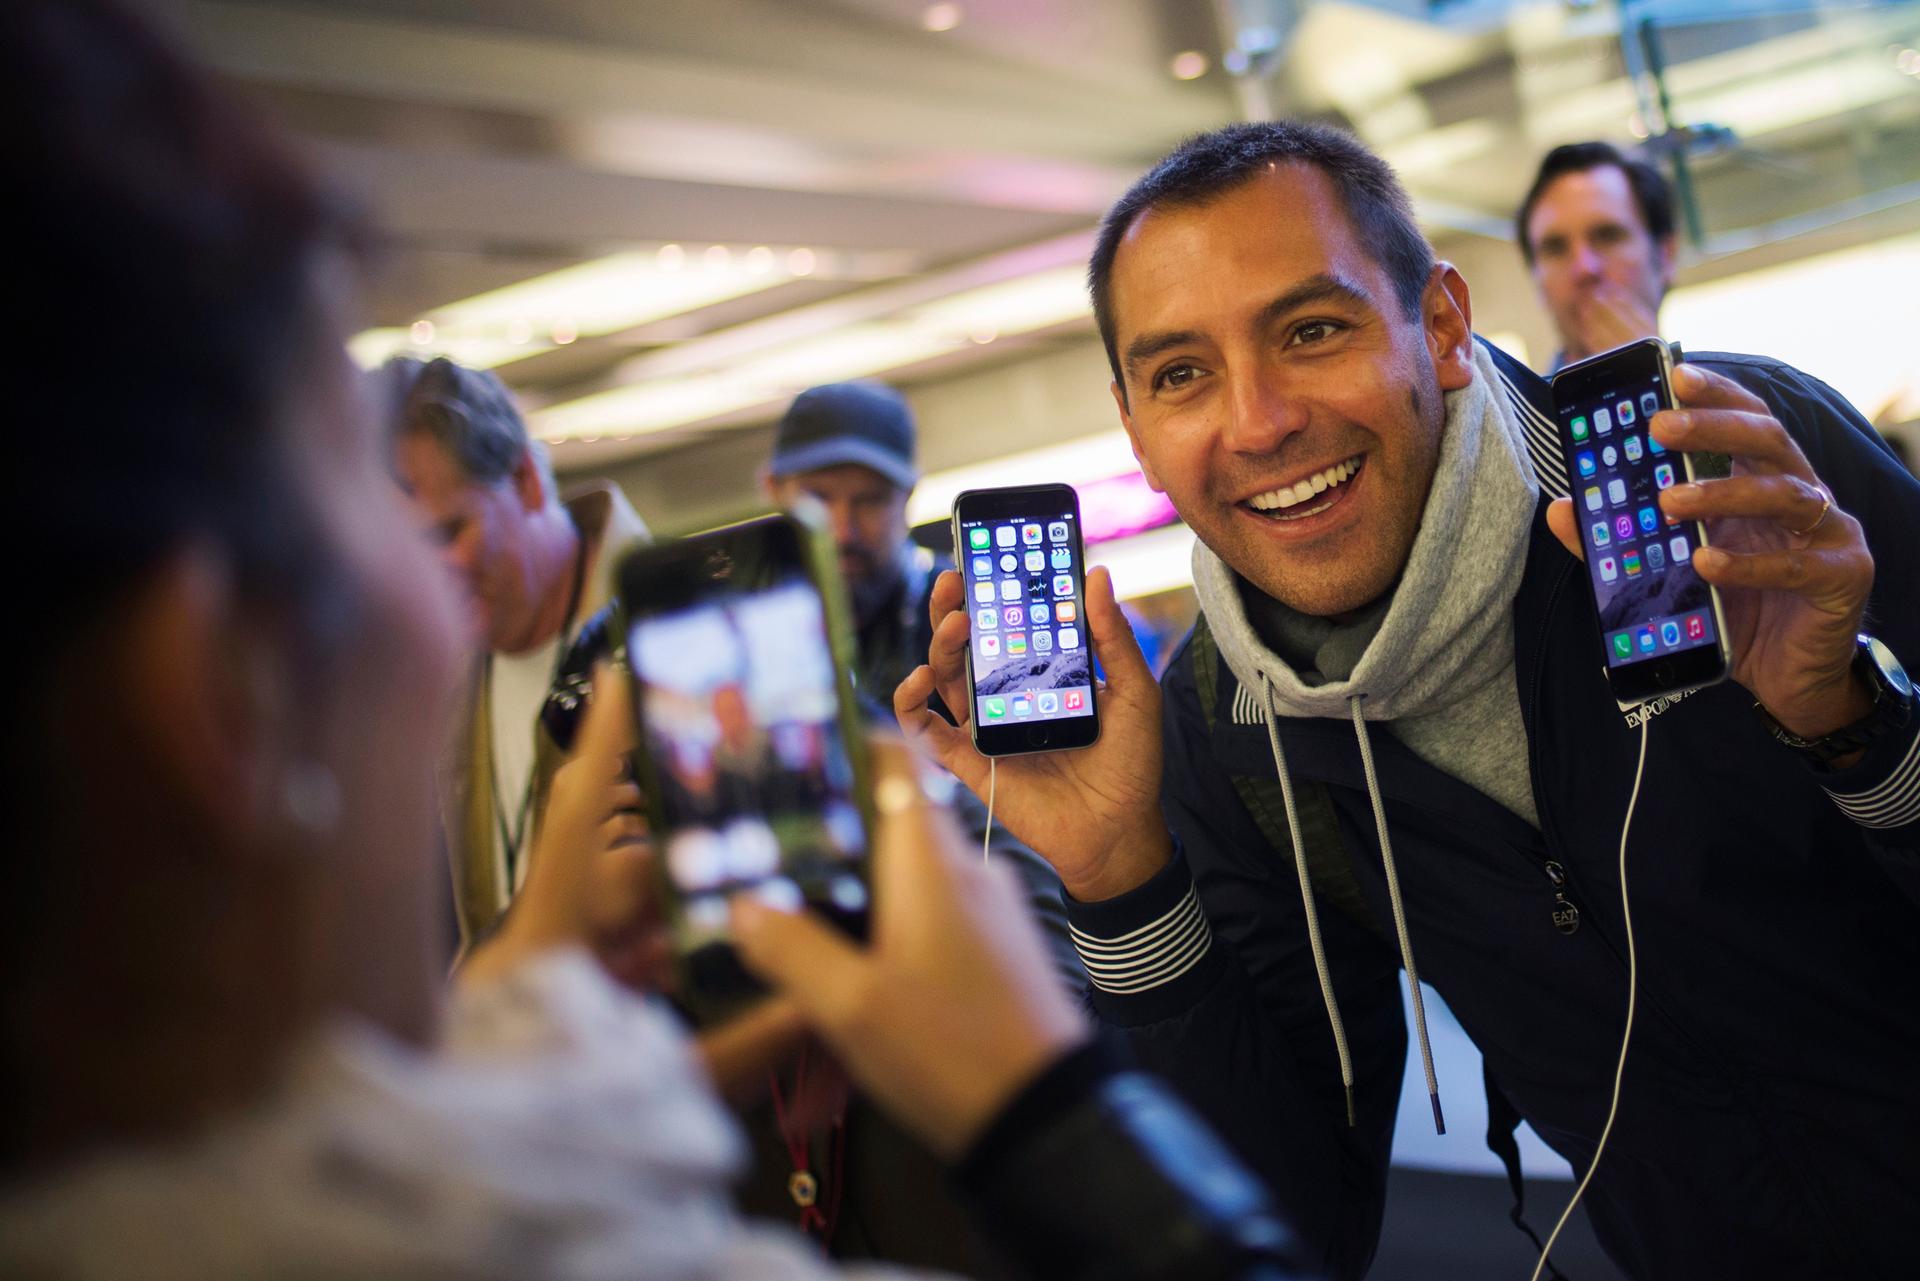 Michele Mattana of Sardinia, Italy, poses with an iPhone 6 Plus and an iPhone 6 on the first day of sales at the Fifth Avenue store in Manhattan on September 19, 2014.